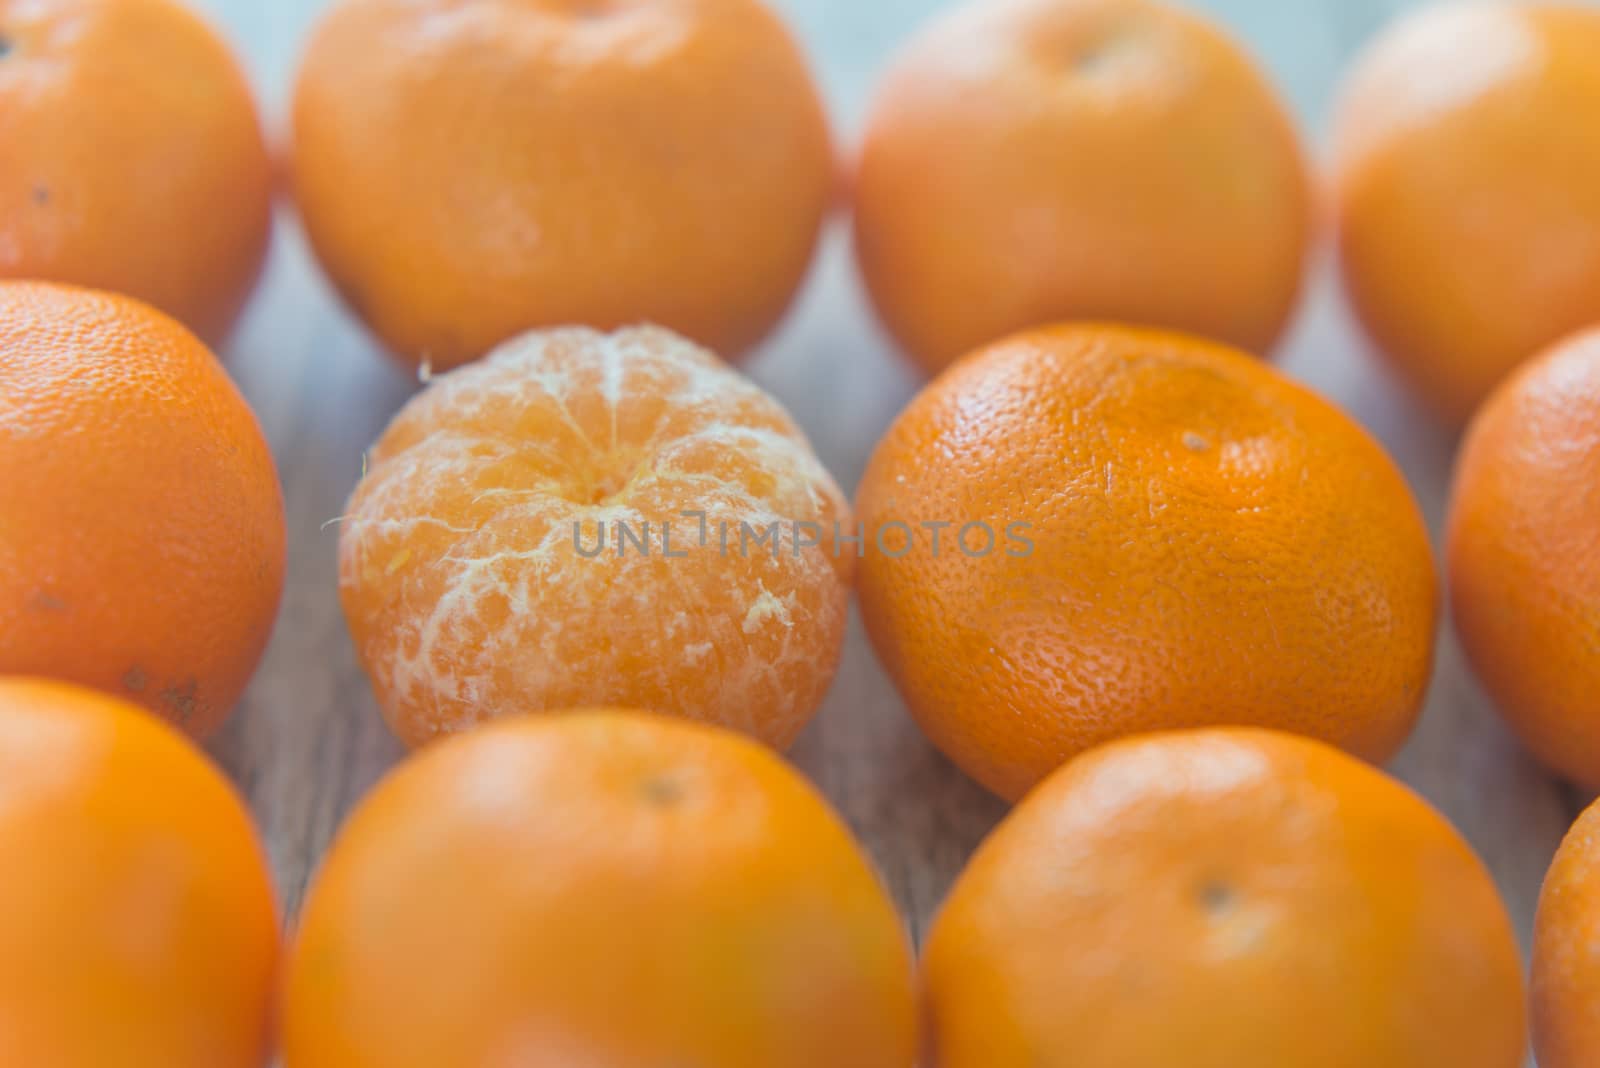 Group of the tangerines by Linaga